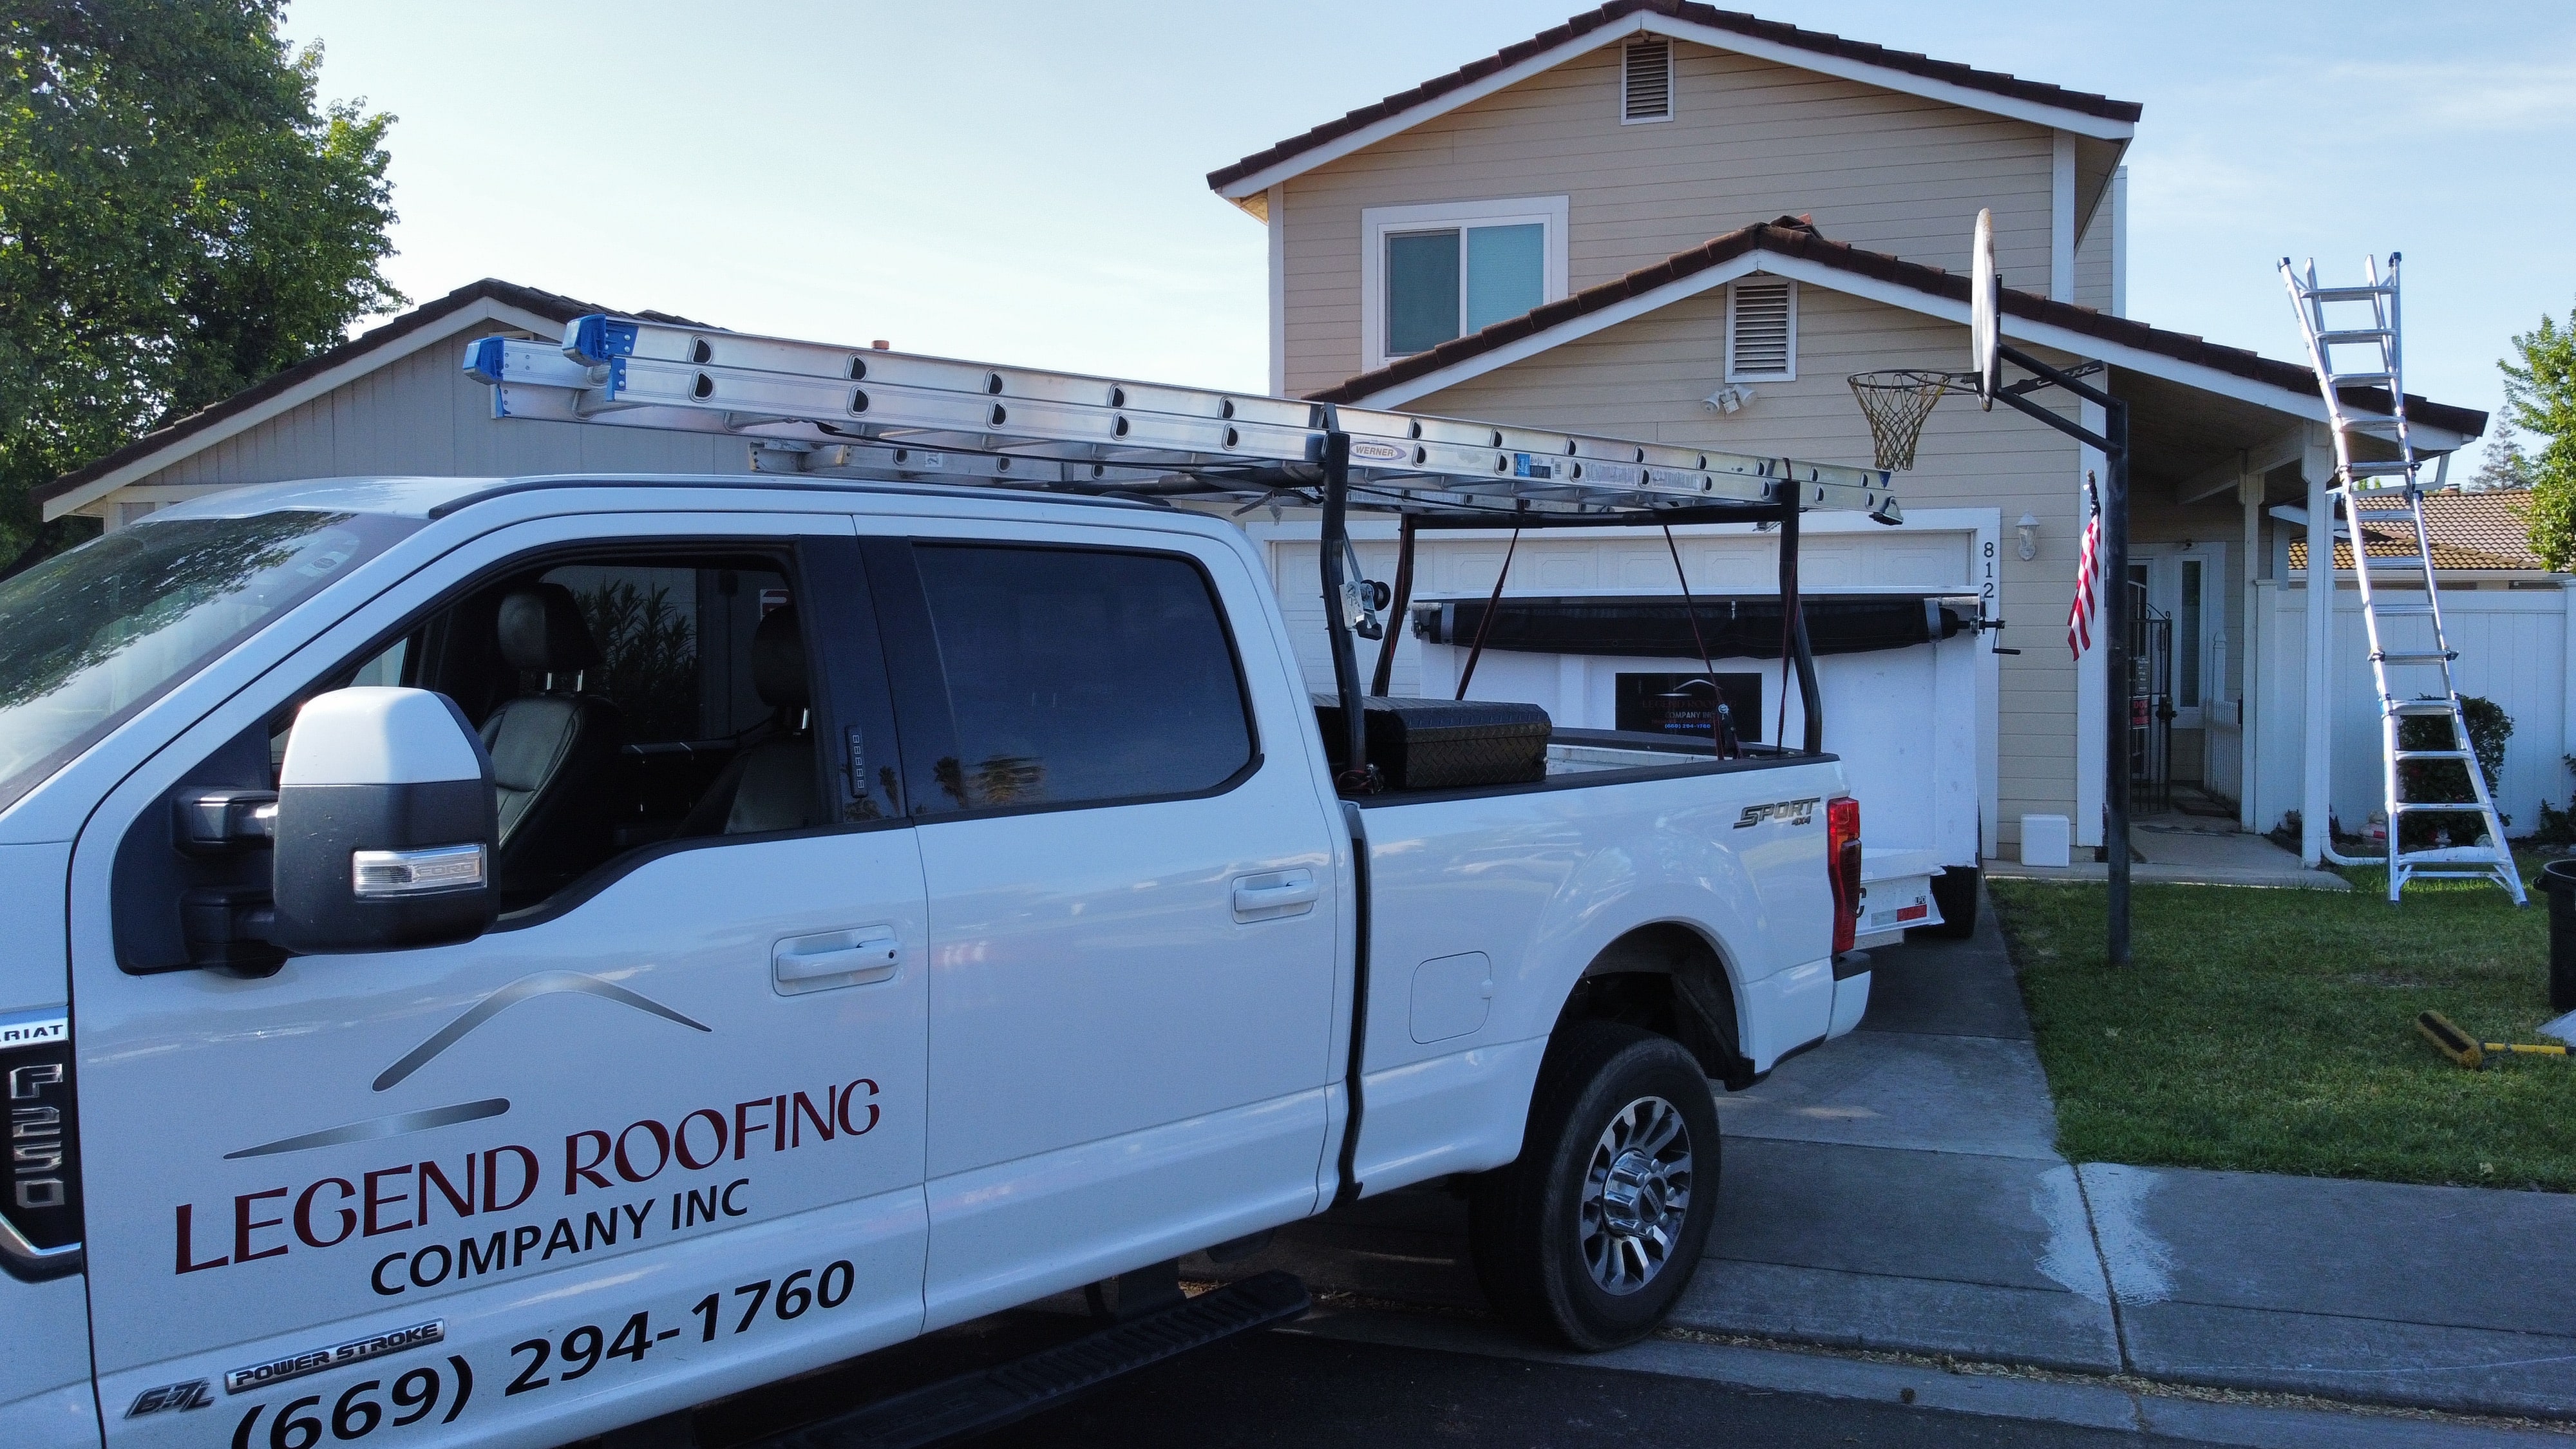 Legend Roofing Company - Expert Roof Replacement - roofing expert installs new roof tiles on the top of resi